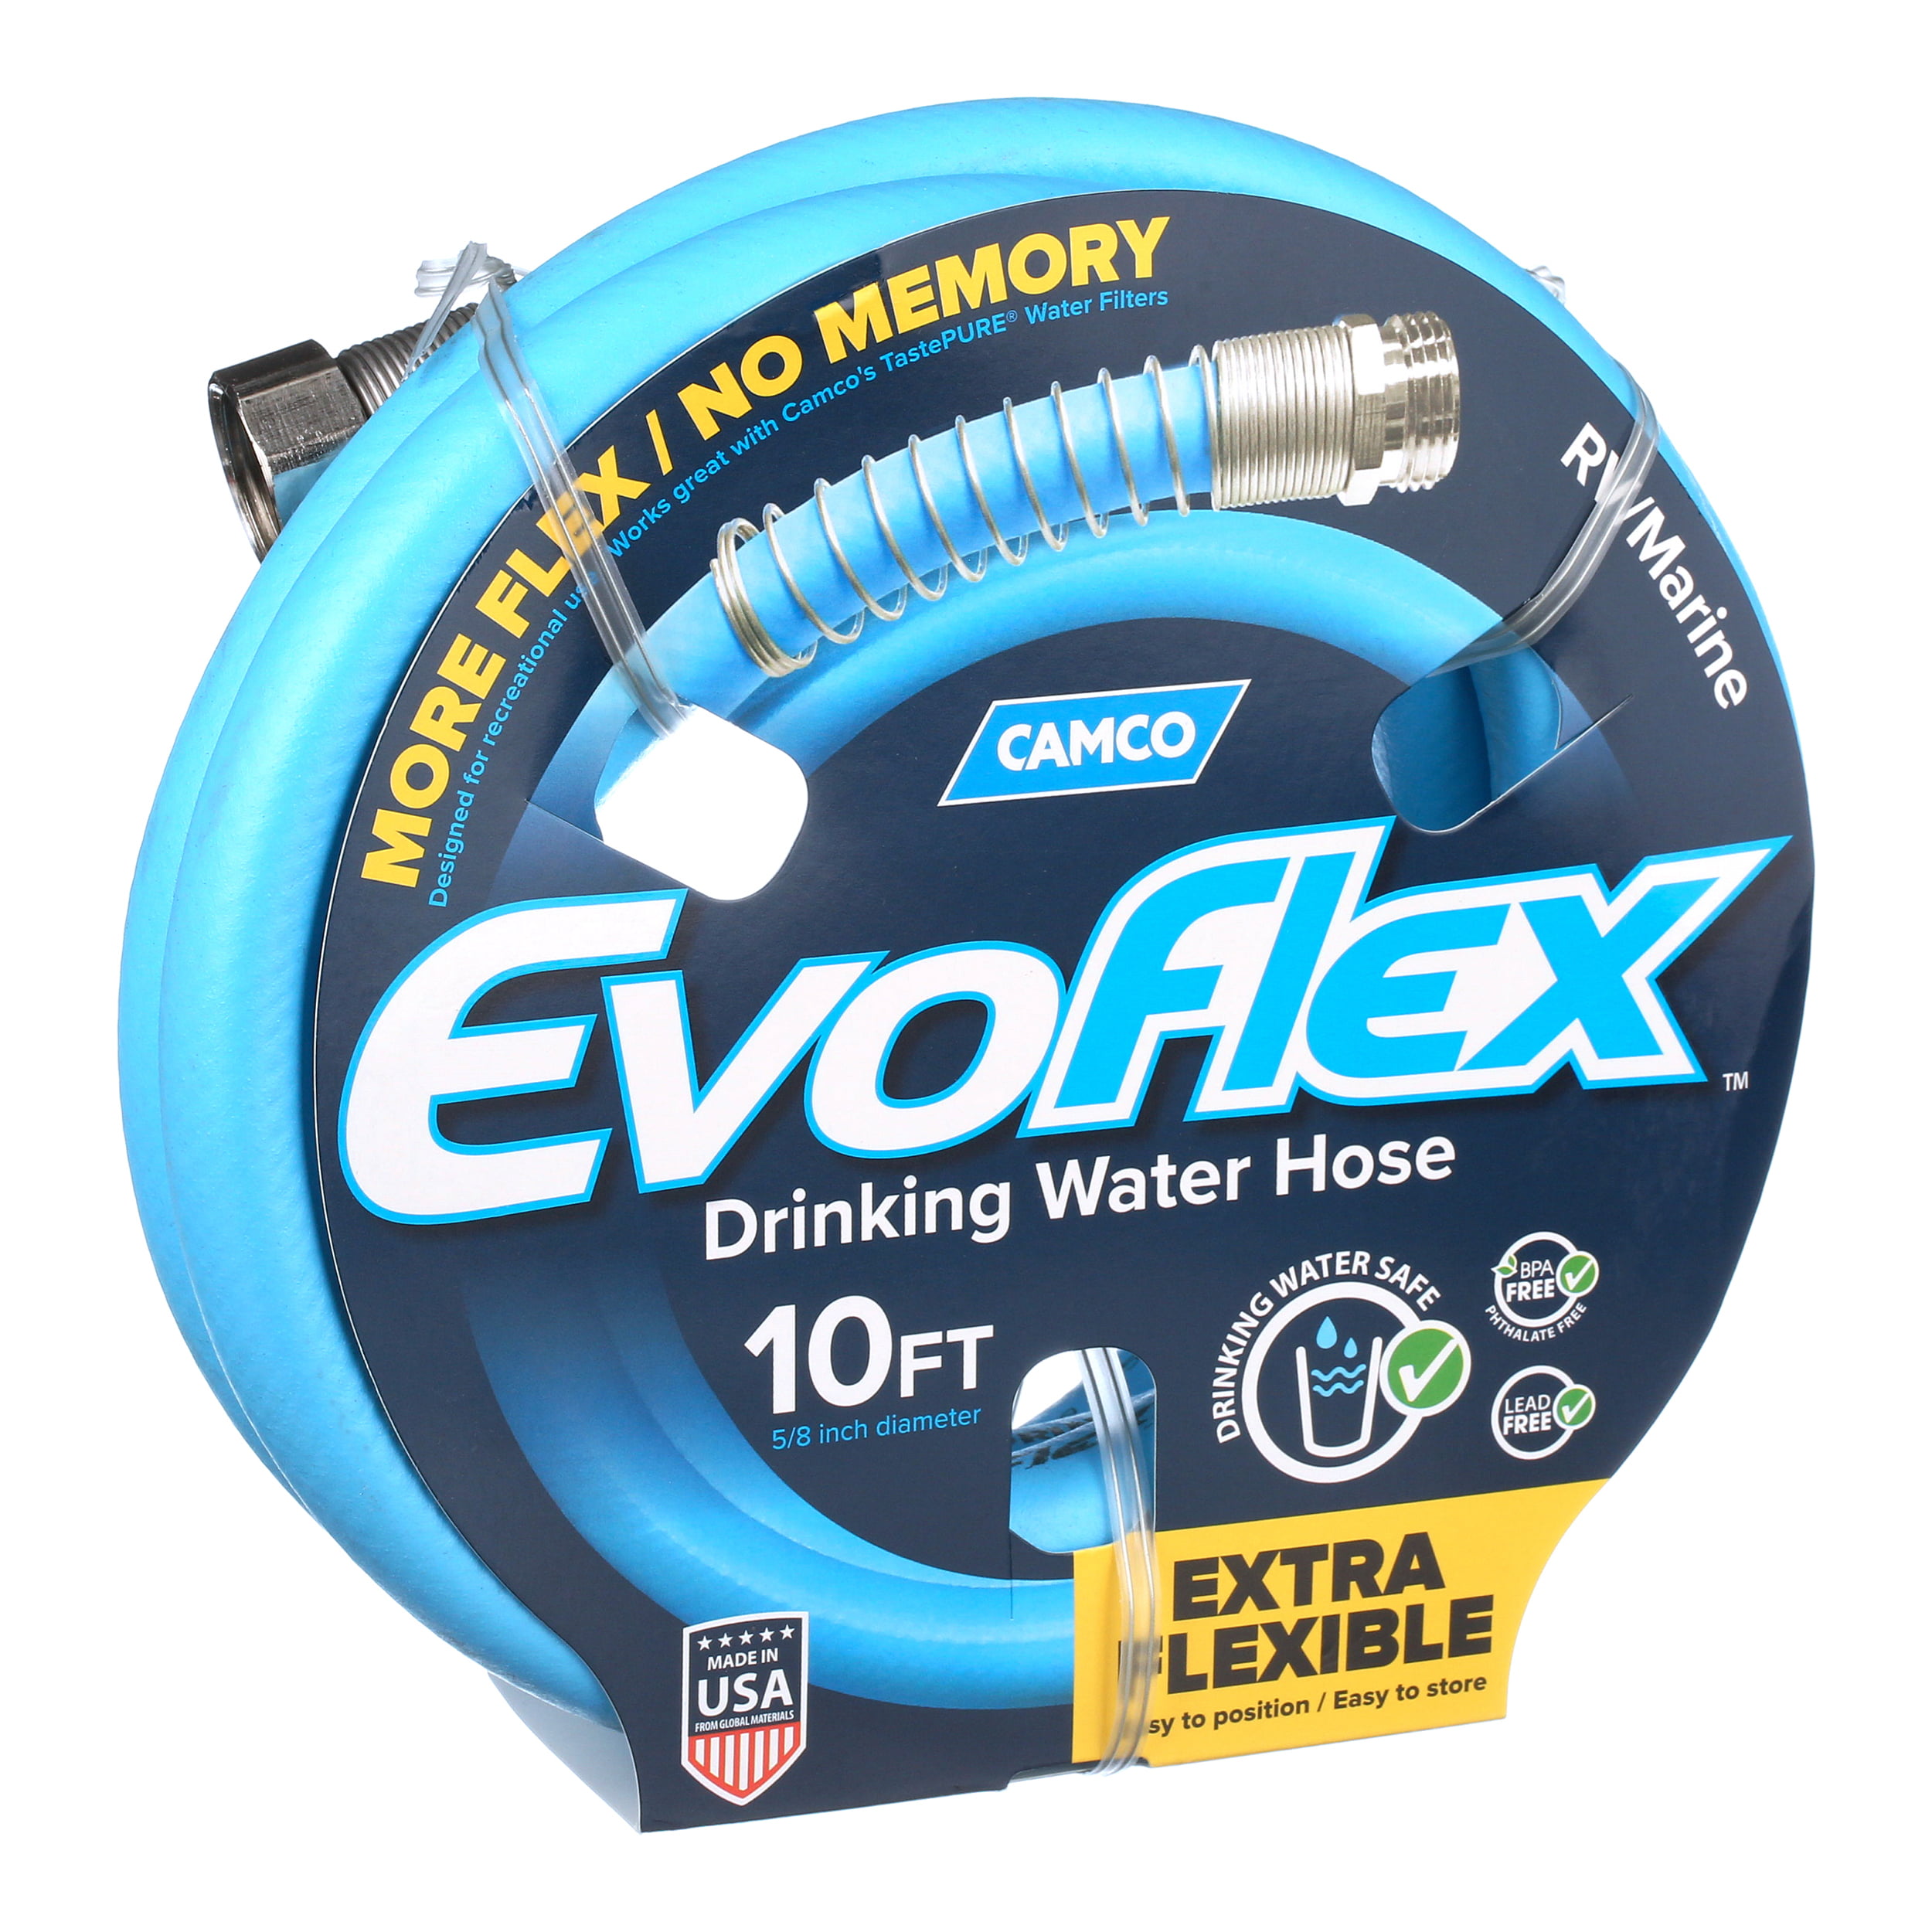 Camco 22592 EvoFlex 10-Foot Drinking Water Hose - With 5/8-Inch ID